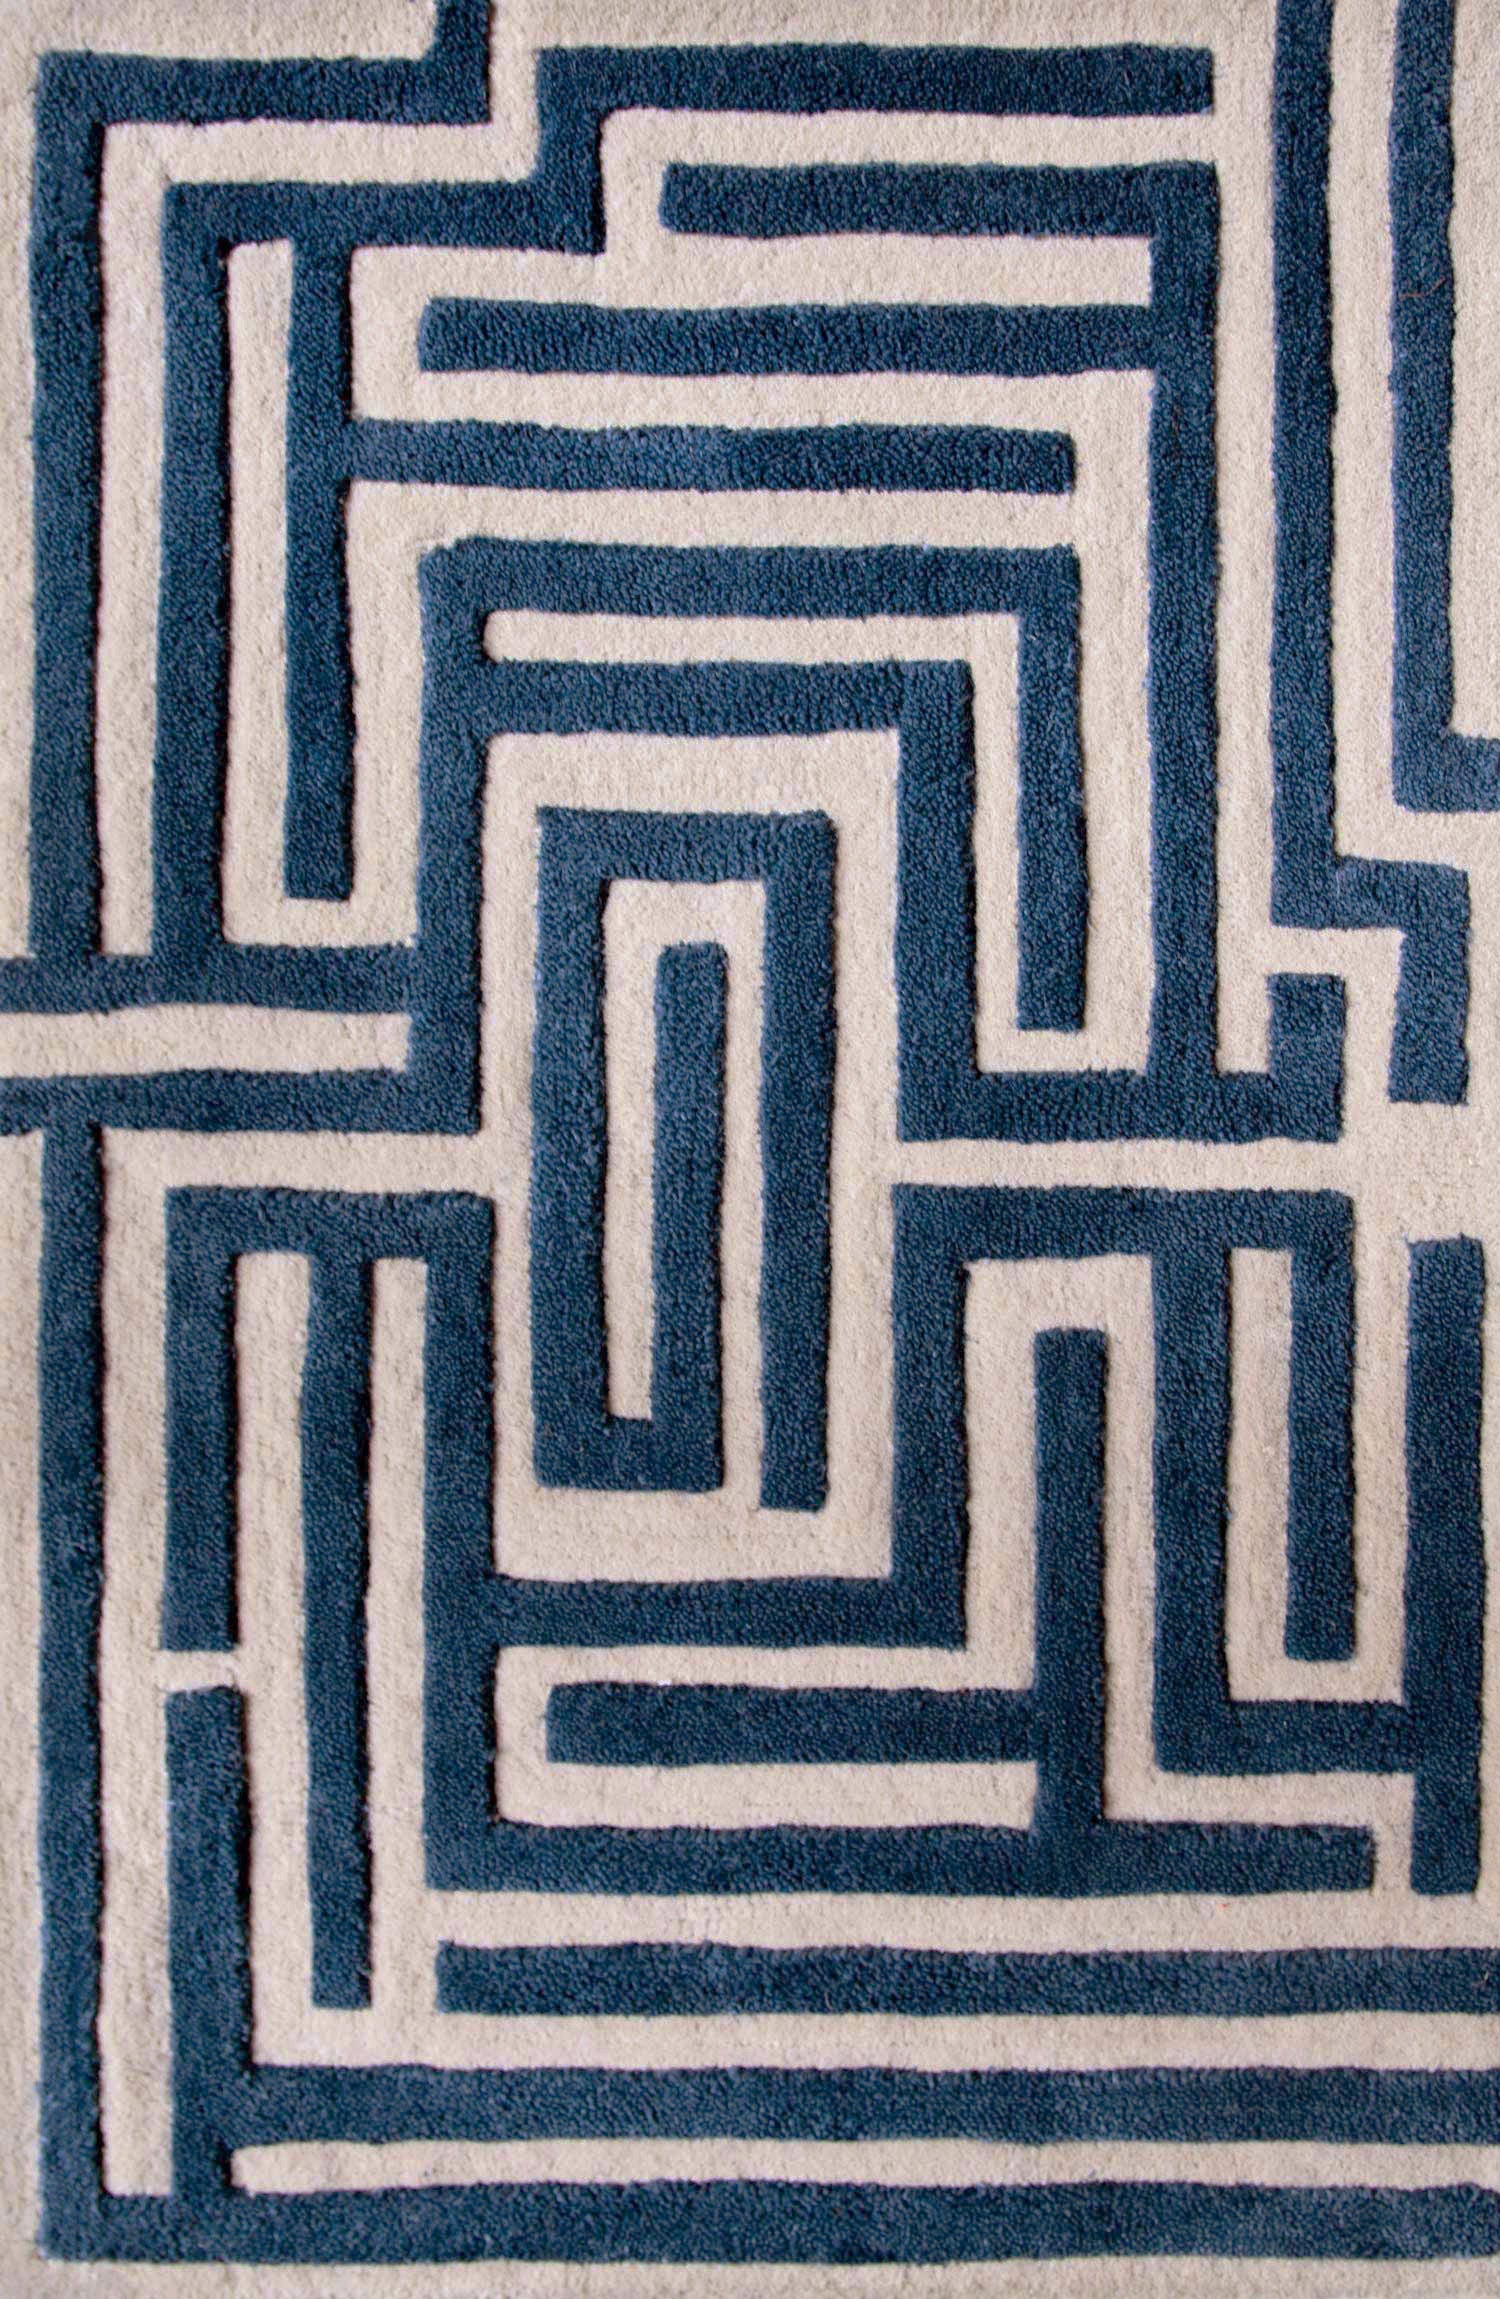 Maze luxury floor rug with a blueberry blue border outlining a beige maze